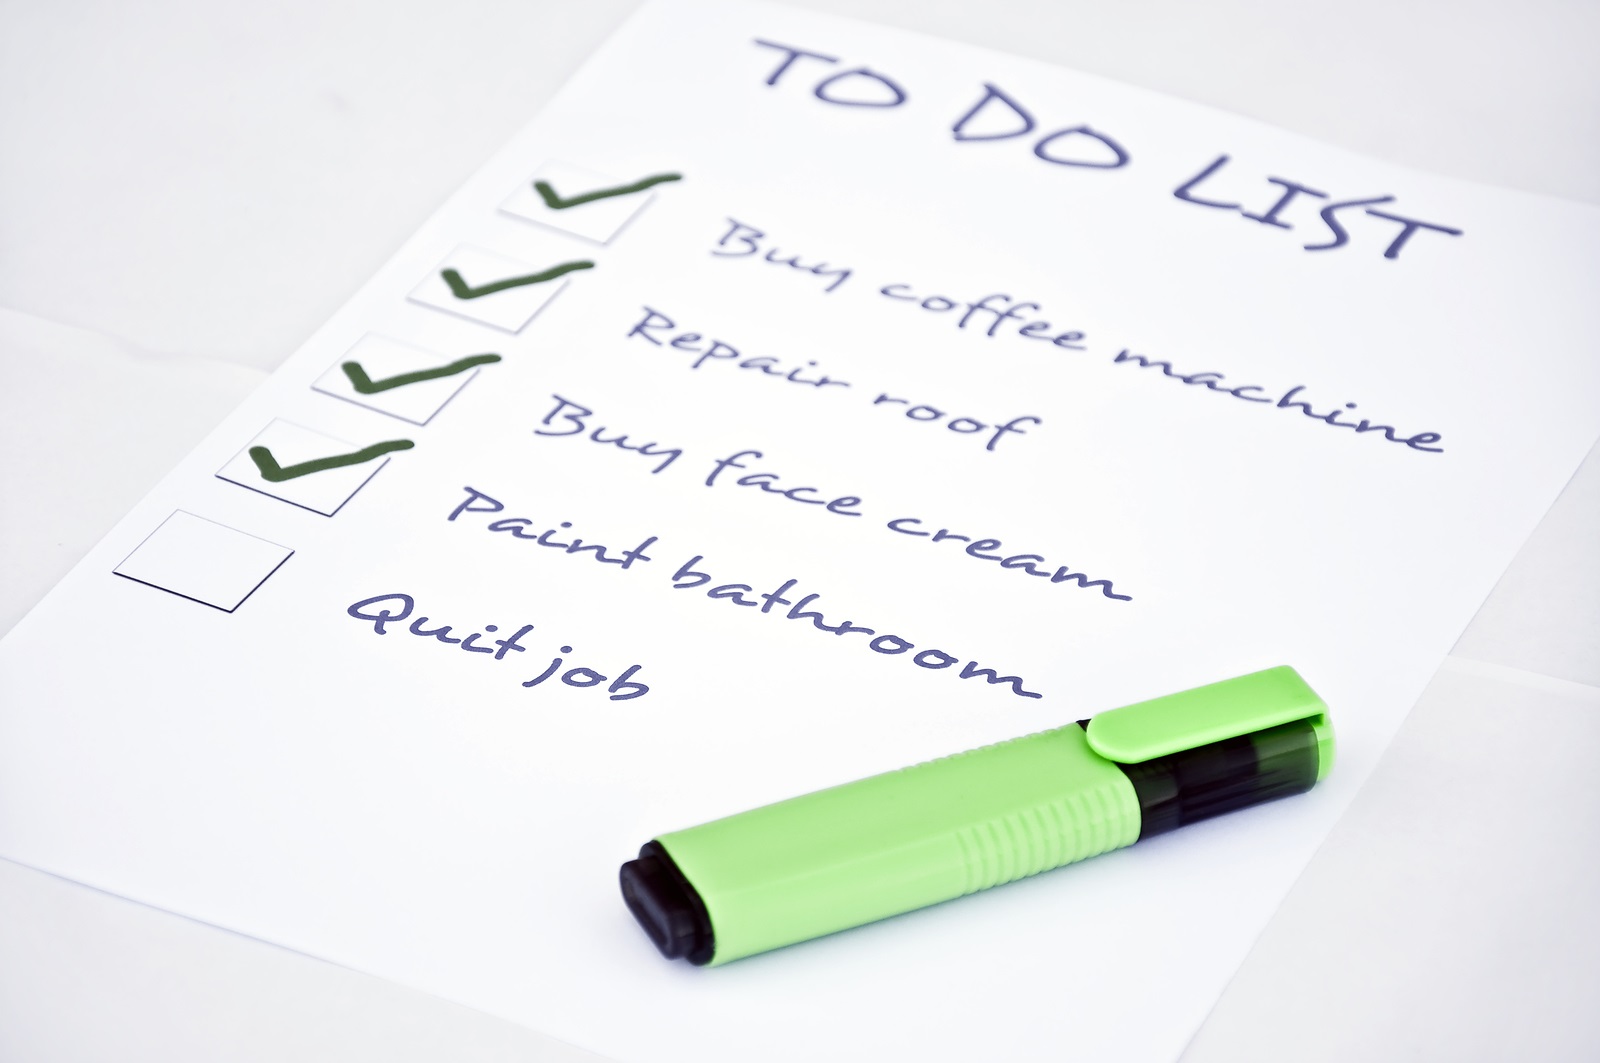 Are you a list maker? Your lists could be hindering you from getting things done!